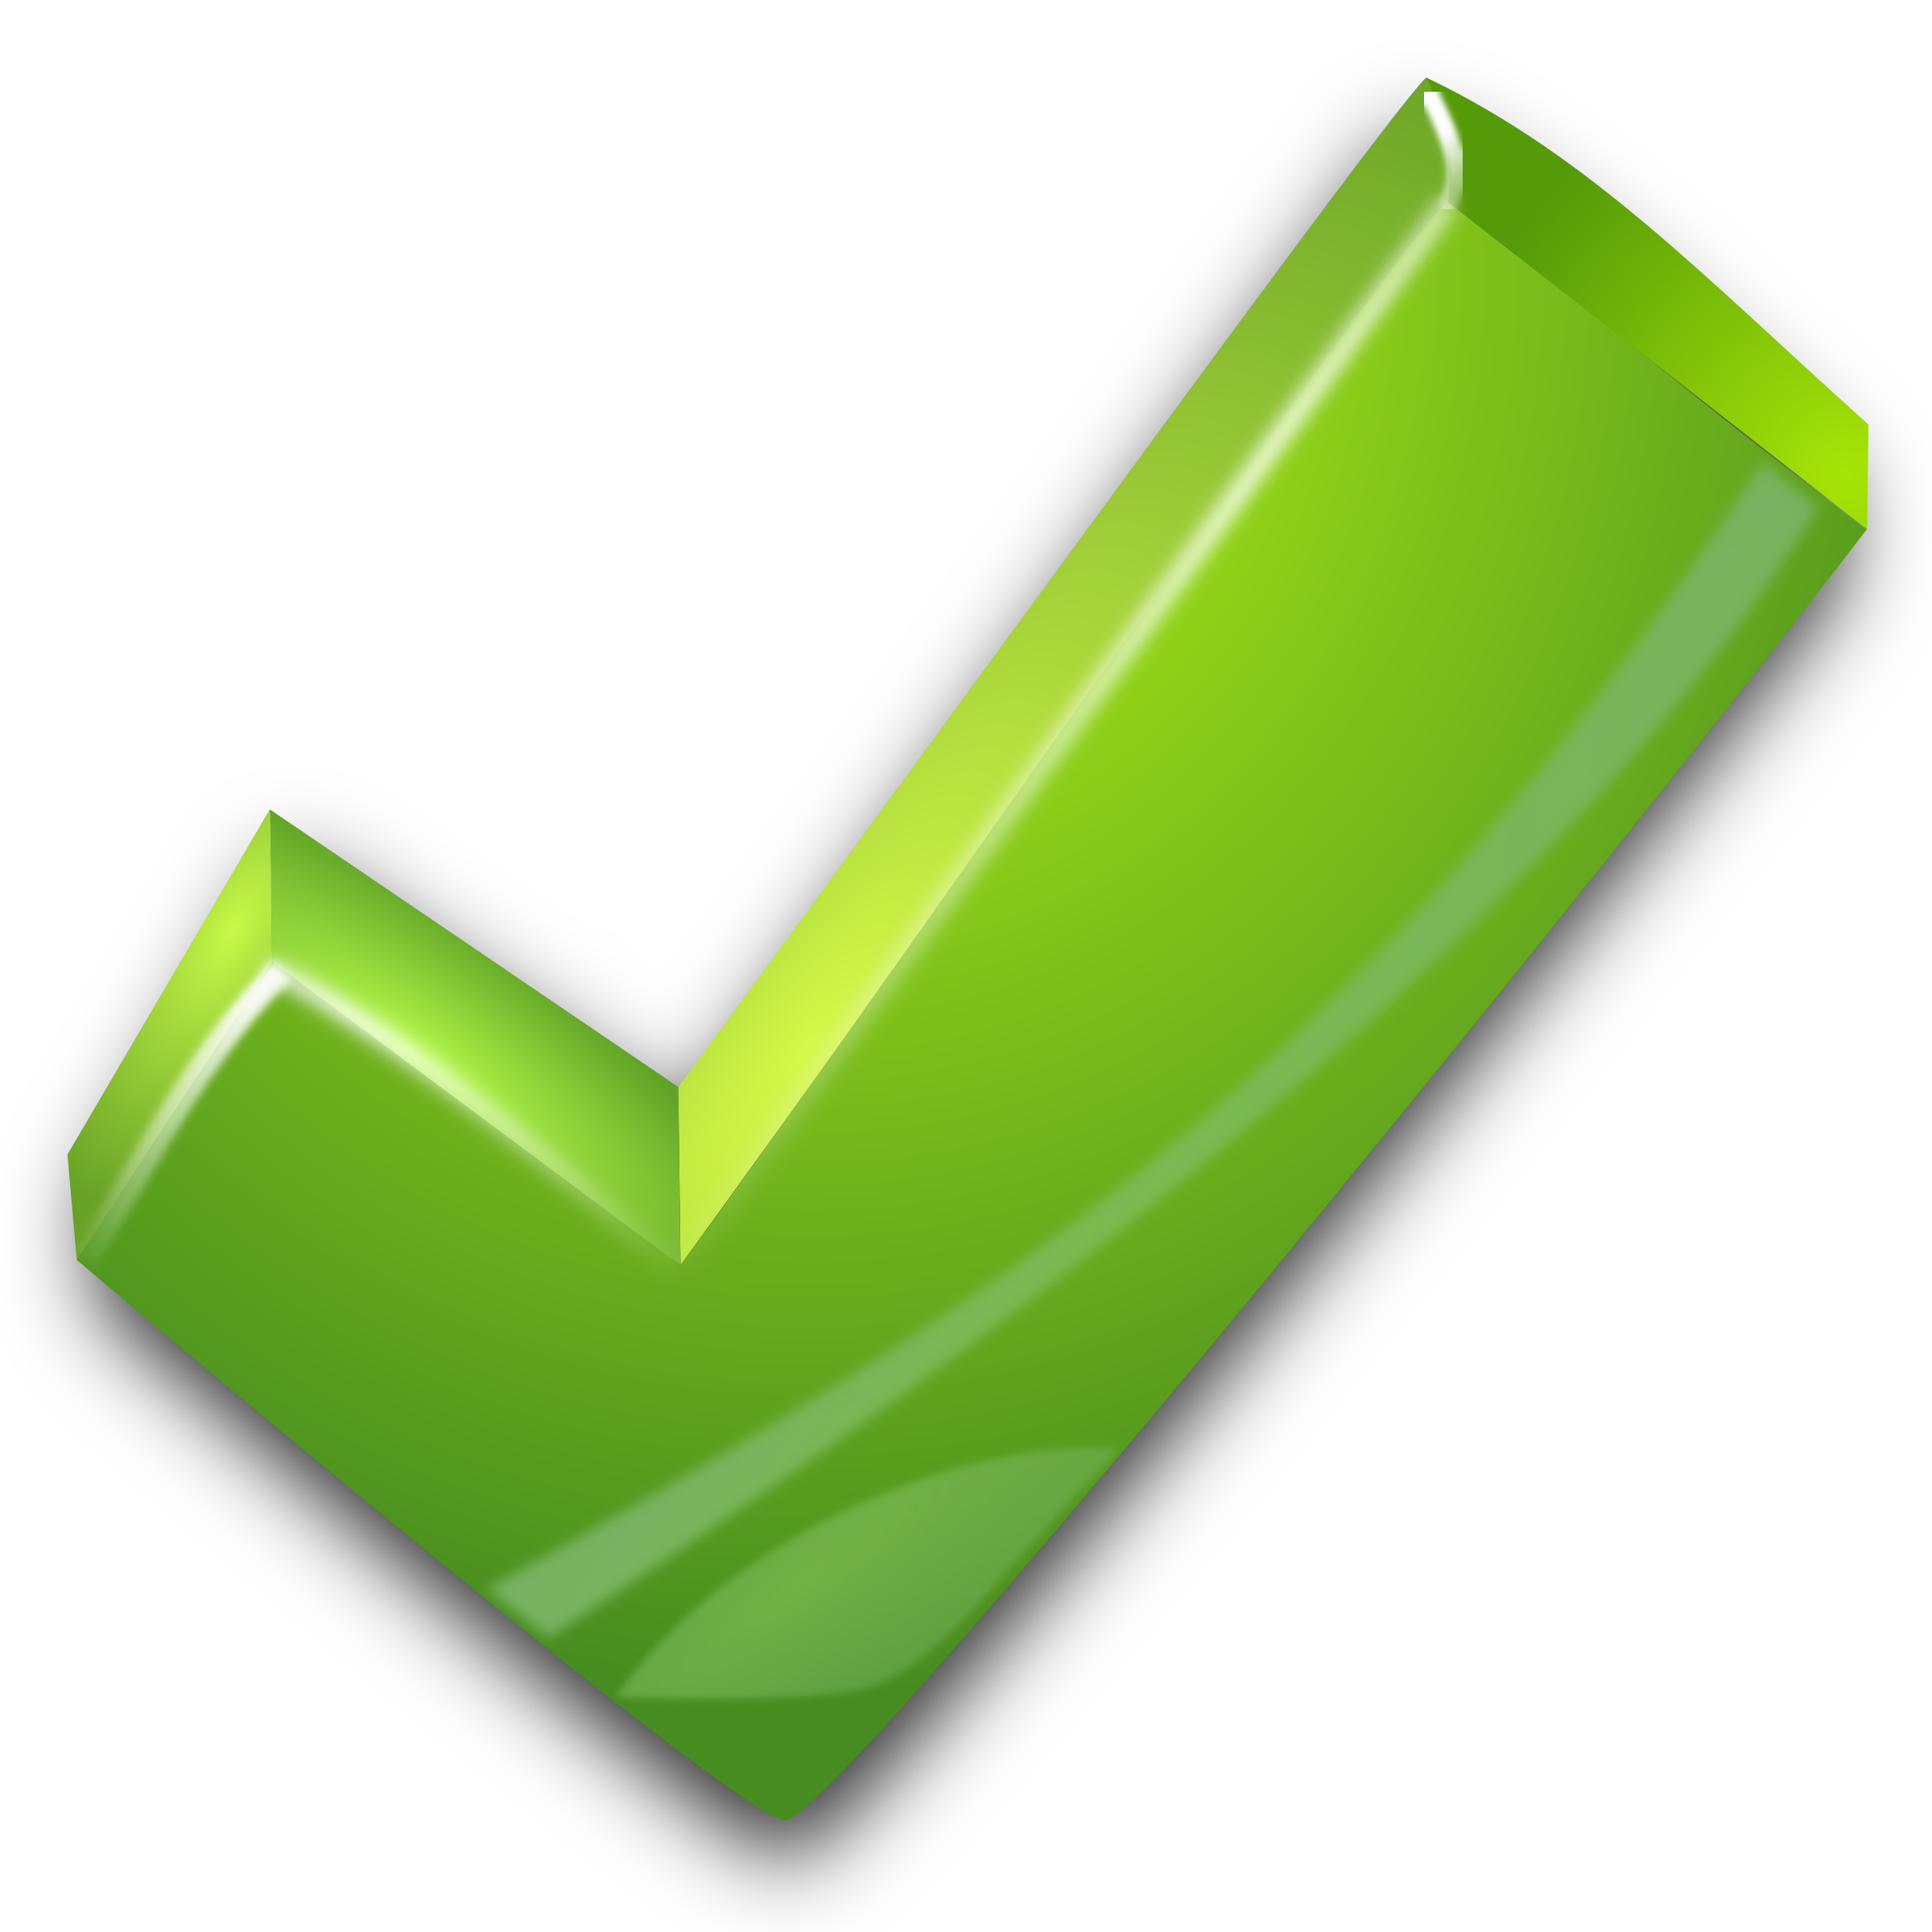 Green Check Mark PNG Picture